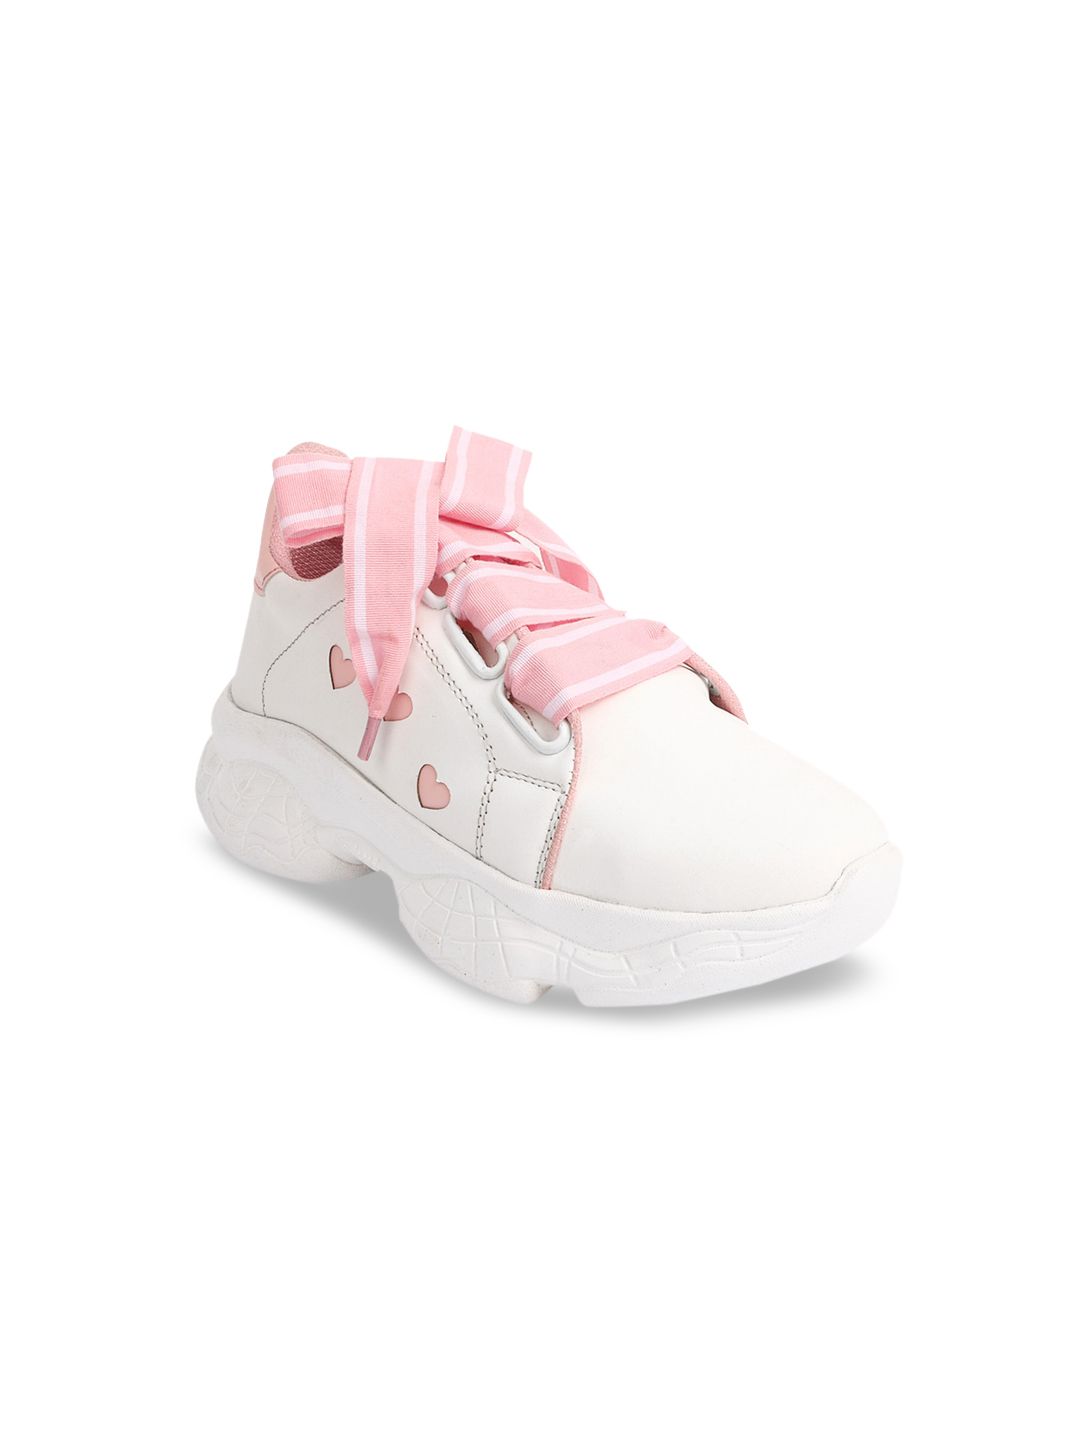 ZAPATOZ Women Pink Sneakers Price in India